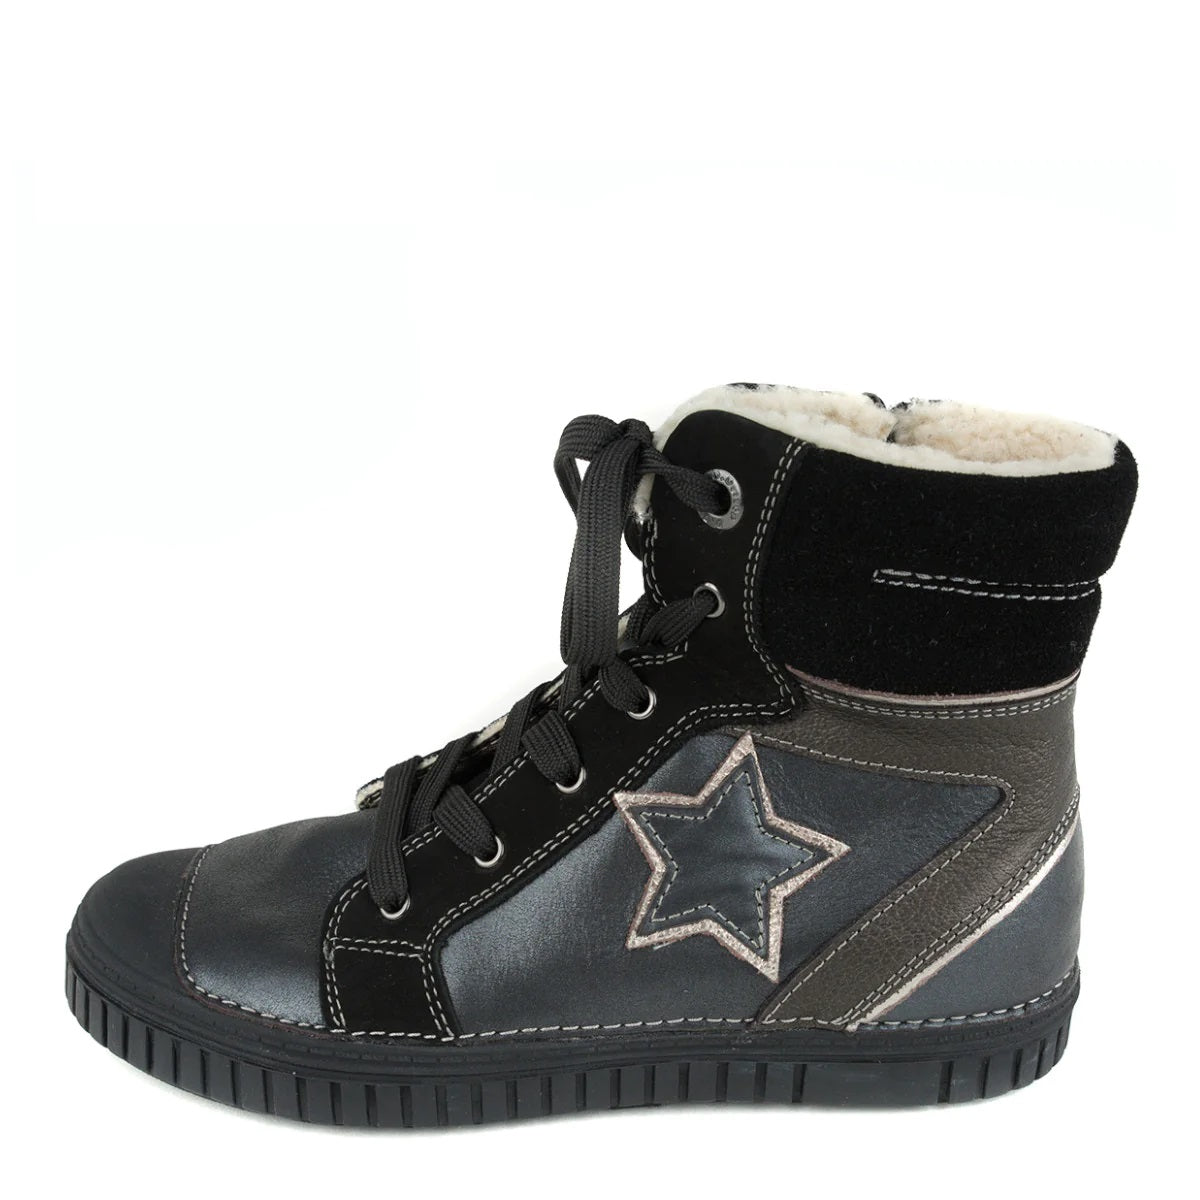 Premium quality high-top shoes with faux fur insulation and genuine leather upper in dark grey and black color with star. Thanks to its high level of specialization, D.D. Step knows exactly what your child’s feet need, to develop properly in the various phases of growth. The exceptional comfort these shoes provide assure the well-being and happiness of your child.